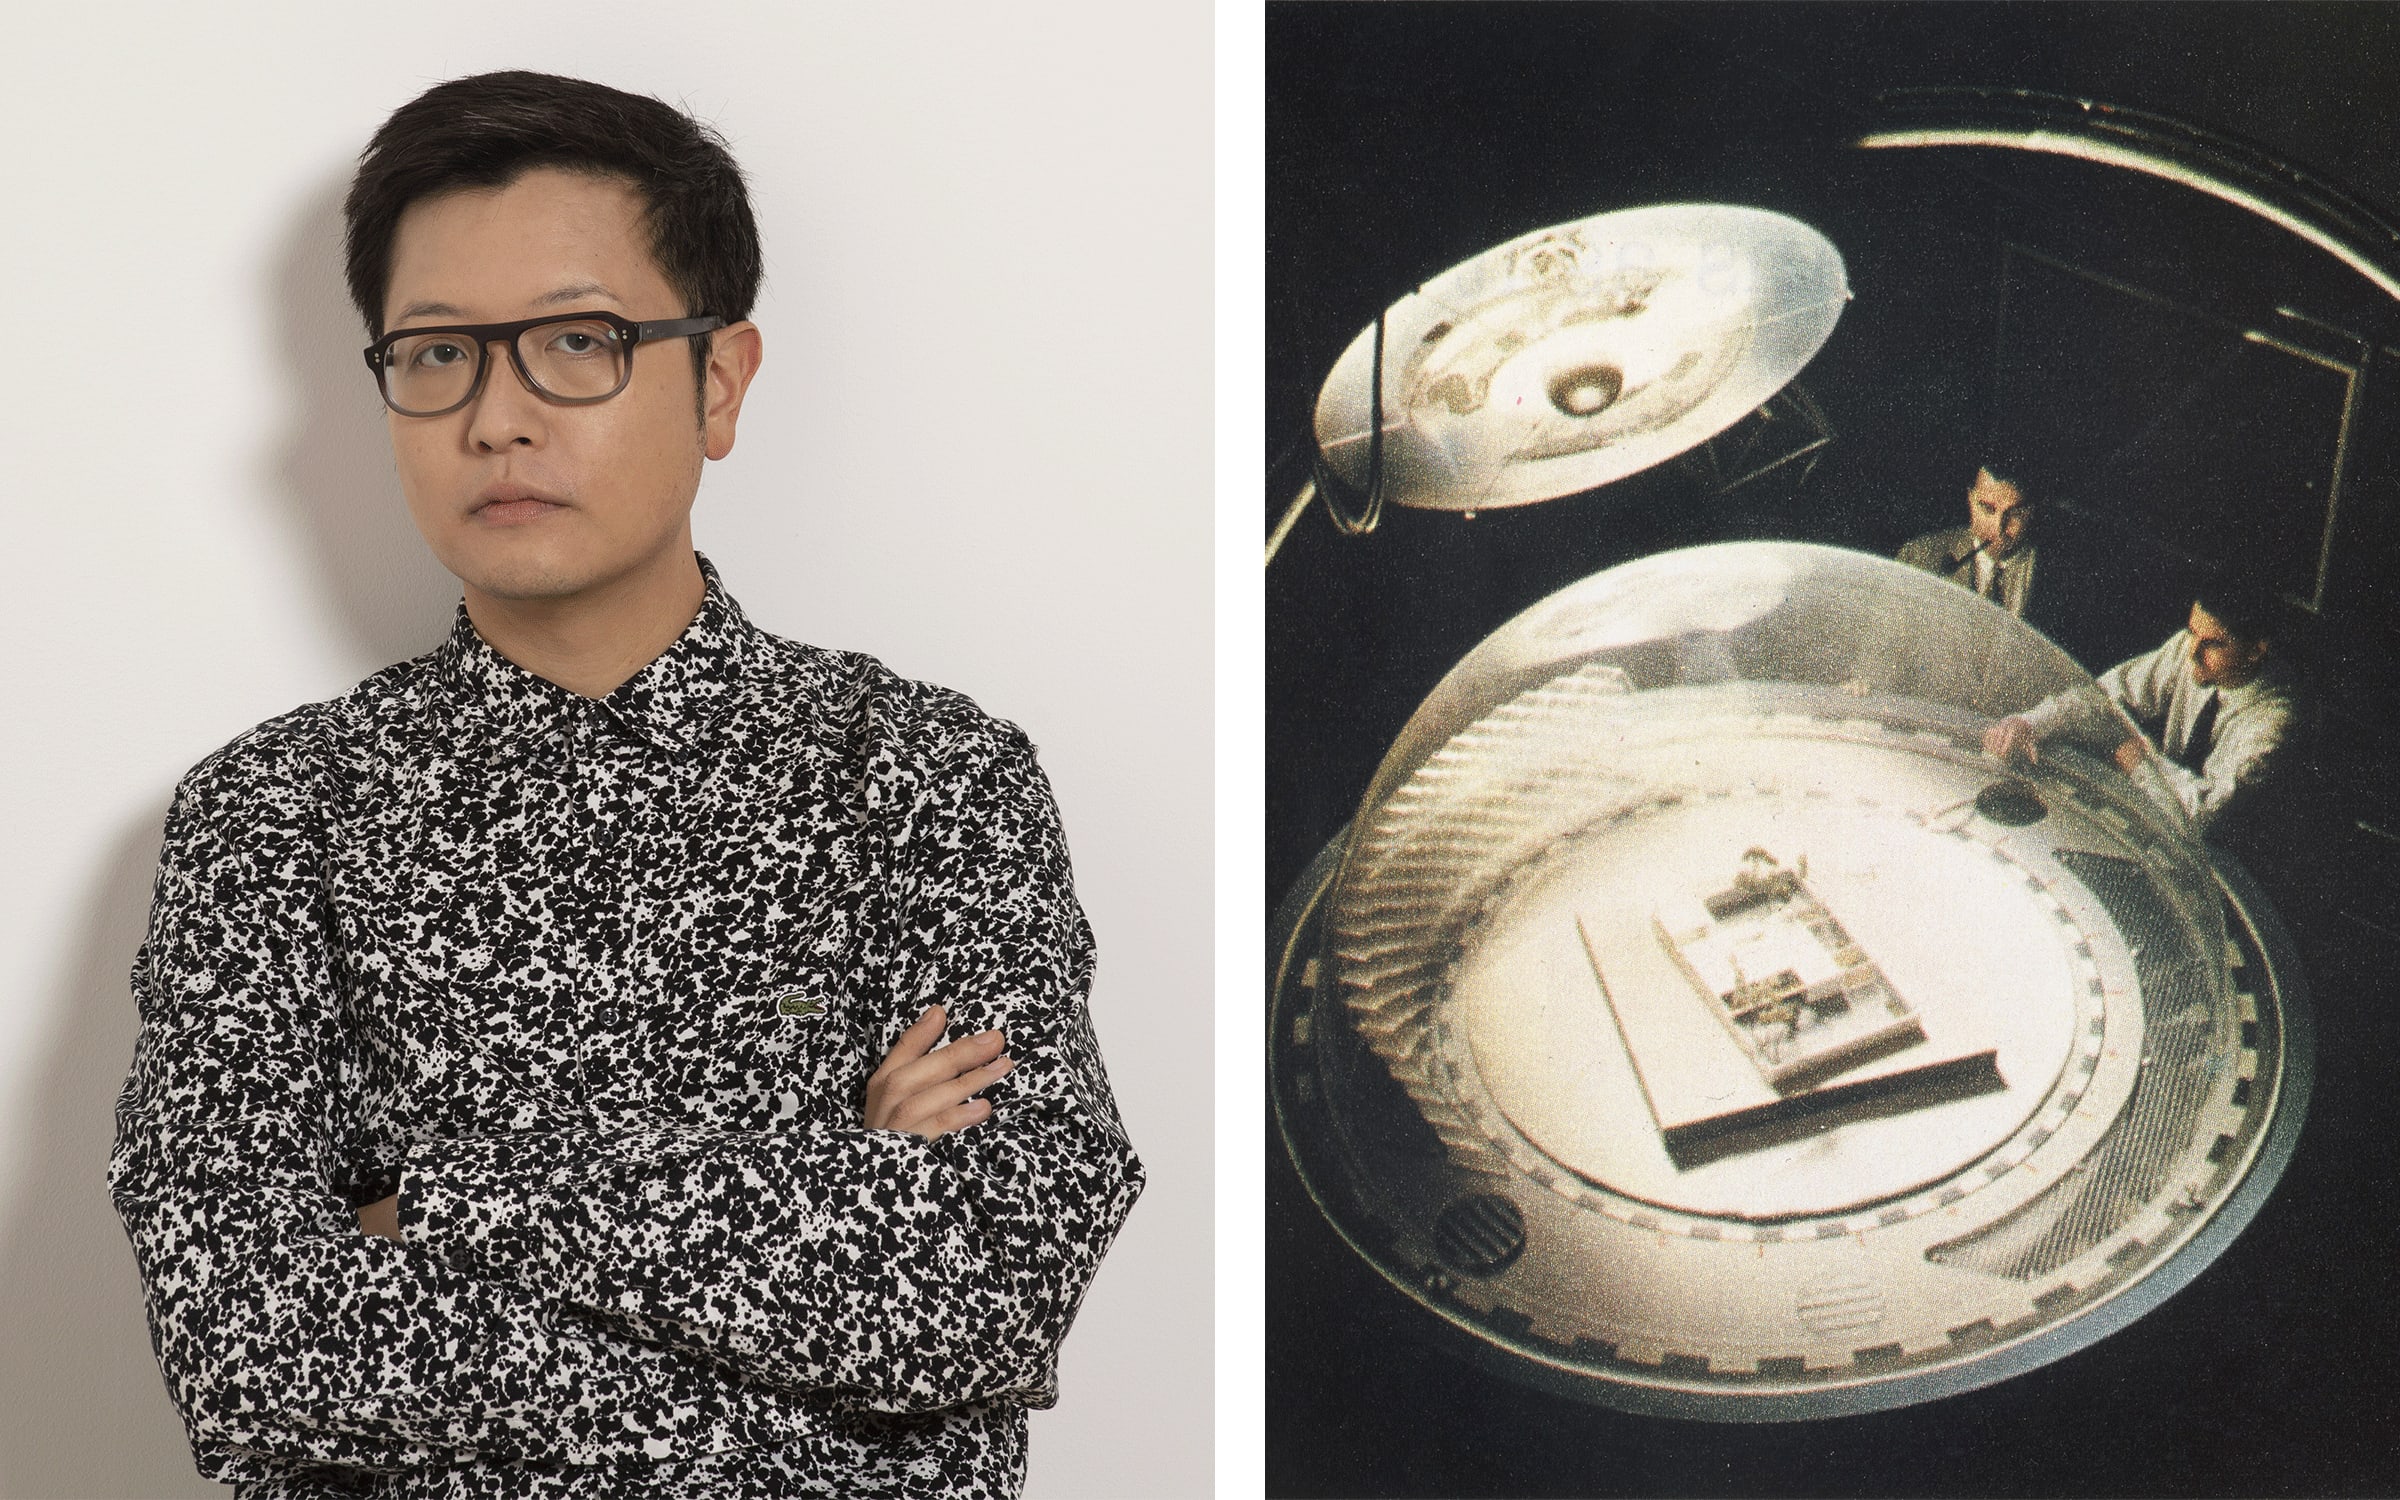 Left: Carson Chan © 2021 The Museum of Modern Art, New York. Photo by Peter Ross. Right: Aladar Olgyay (Hungarian, 1910 – 1963) and Victor Olgyay (Hungarian, 1910 – 1970). Thermoheliodon. 1955–56. The Olgyay brothers with their Thermoheliodon device at the Princeton Architectural Laboratory, Princeton, New Jersey. From Collier’s, October 26, 1956. Photograph: Guy Gillette.